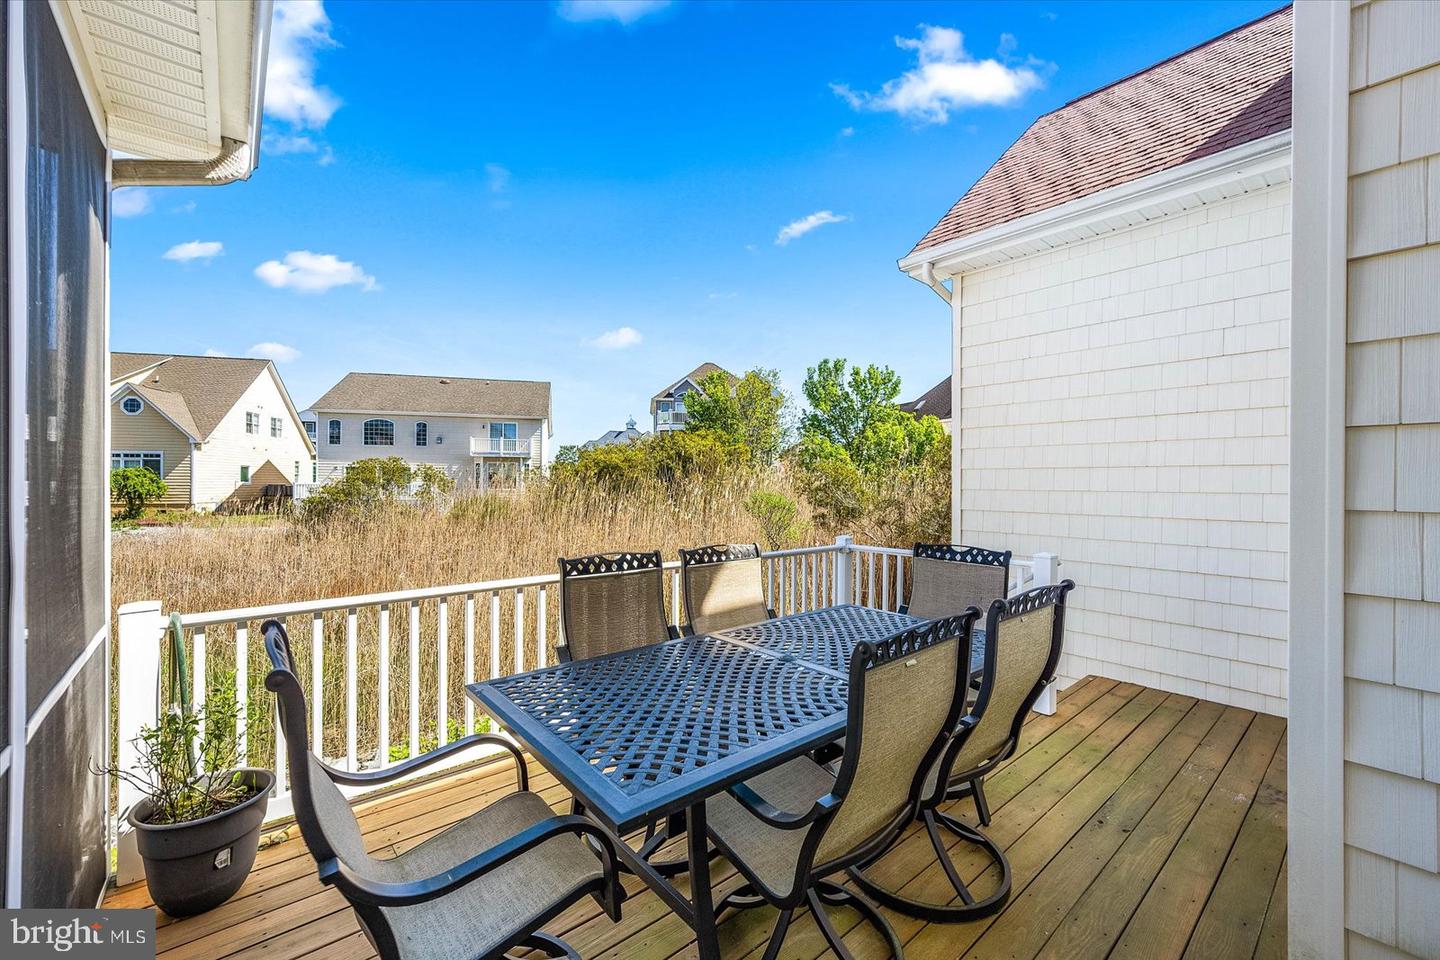 304 S Heron Gull Court, Ocean City, Maryland, 21842, United States, 4 Bedrooms Bedrooms, ,5 BathroomsBathrooms,Residential,For Sale,304 S Heron Gull Court,1509832